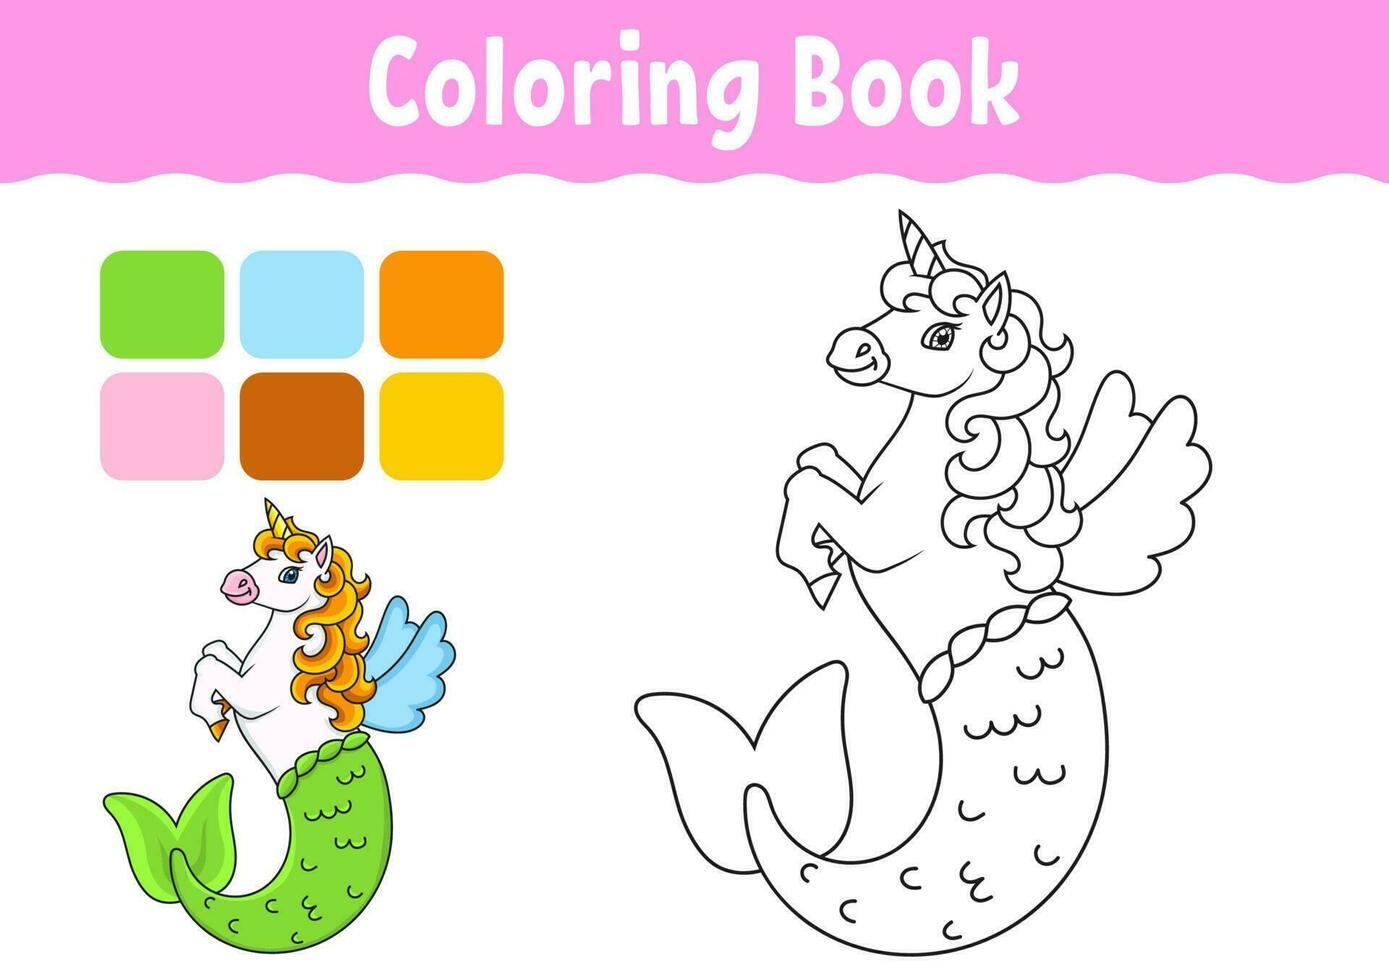 Coloring book for kids. Cute mermaid unicorn. Cheerful character. Vector illustration. Cute cartoon style. Fantasy page for children. Black contour. Isolated on white background.